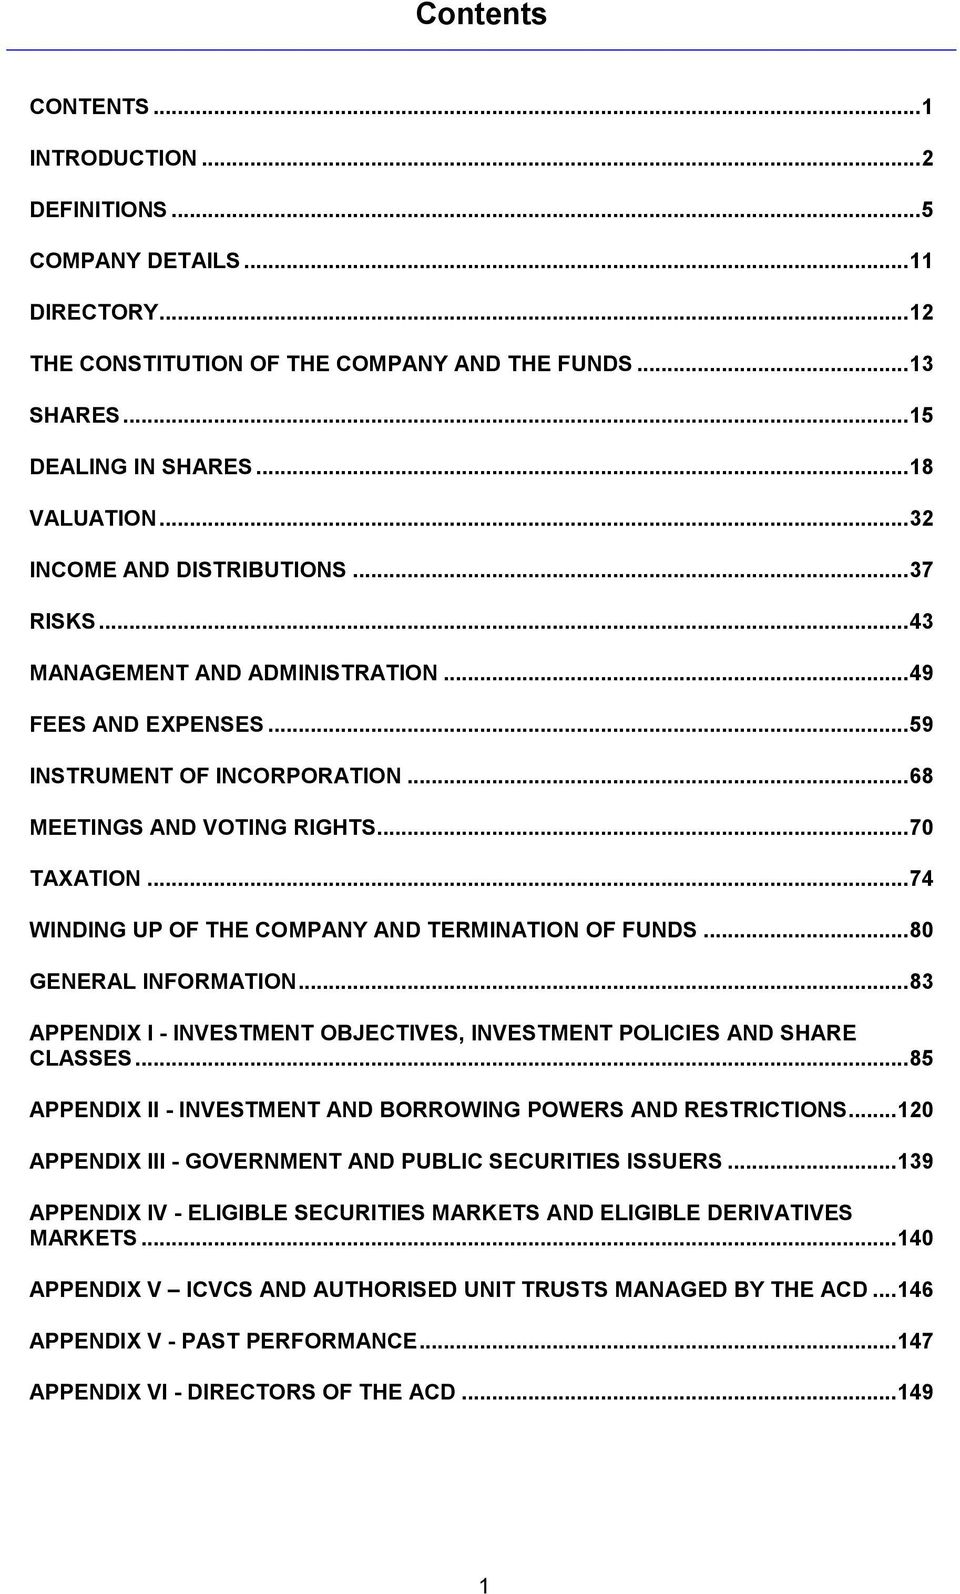 .. 74 WINDING UP OF THE COMPANY AND TERMINATION OF FUNDS... 80 GENERAL INFORMATION... 83 APPENDIX I - INVESTMENT OBJECTIVES, INVESTMENT POLICIES AND SHARE CLASSES.